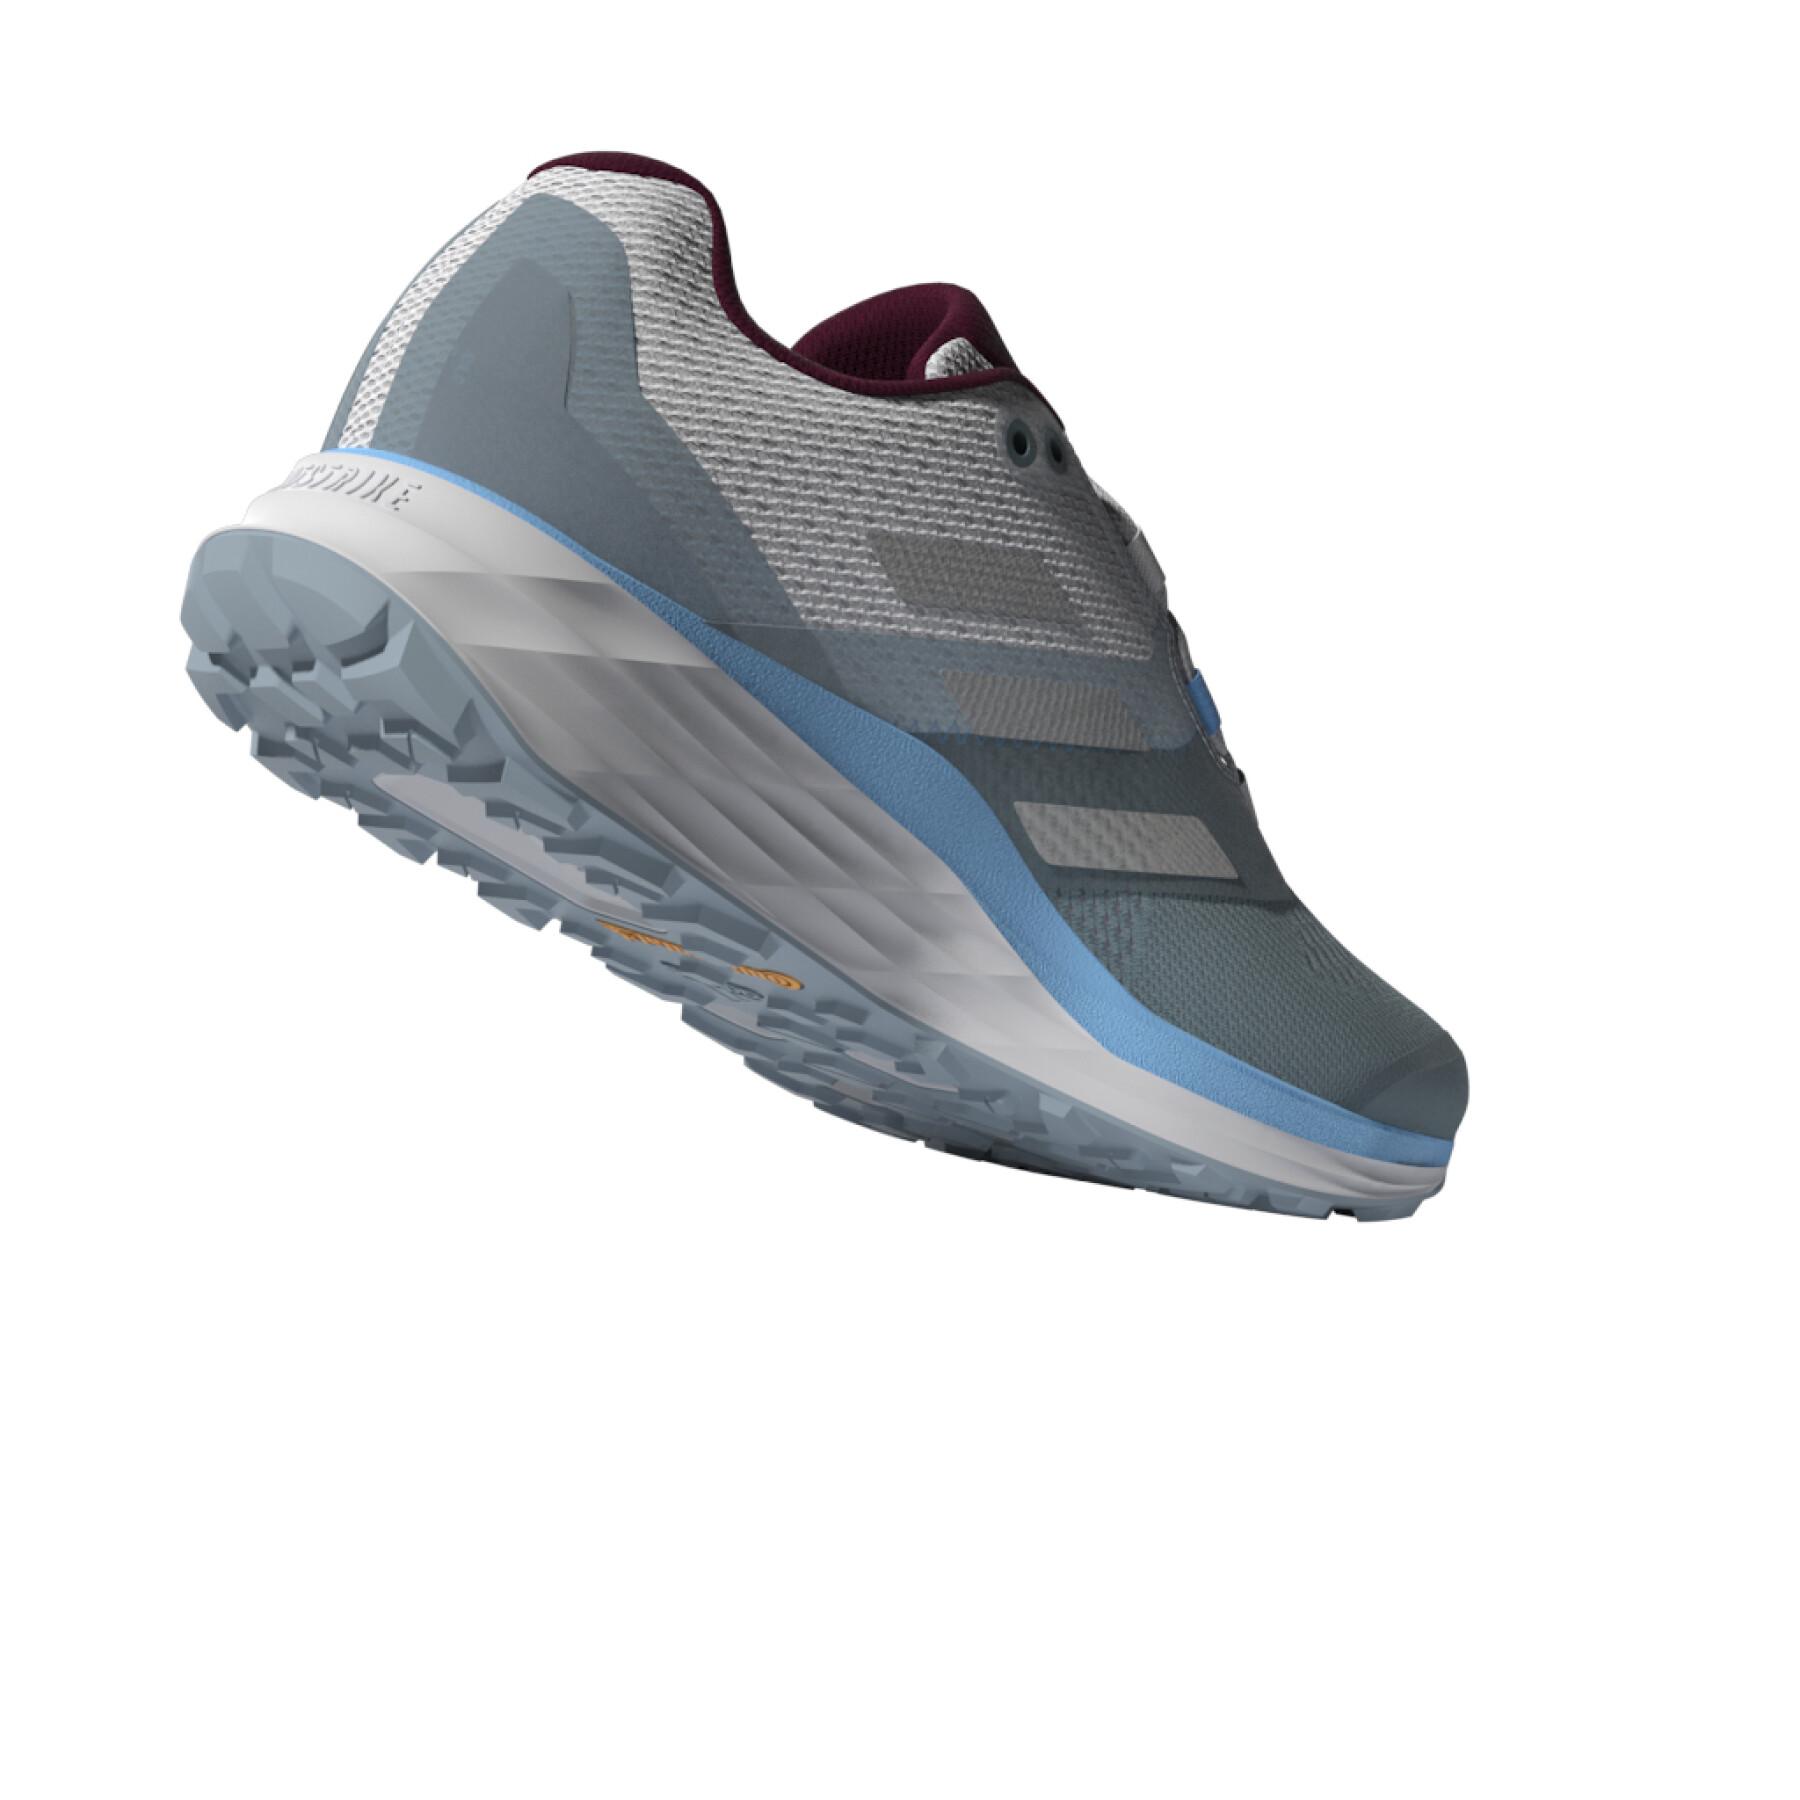 Women's Trail running shoes adidas Terrex Two Flow TR